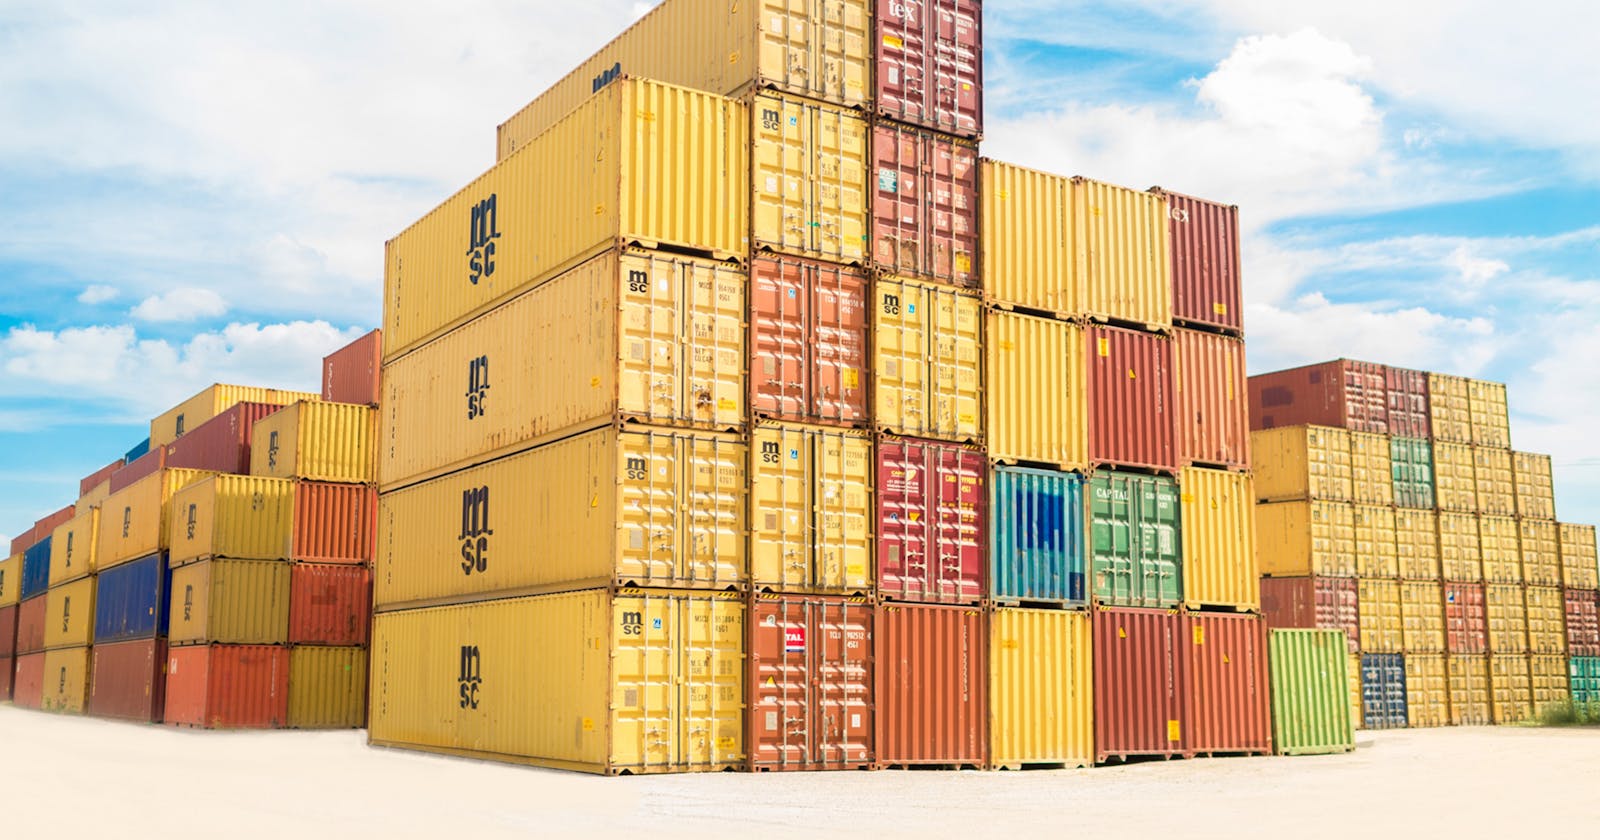 Containers: Under the Hood